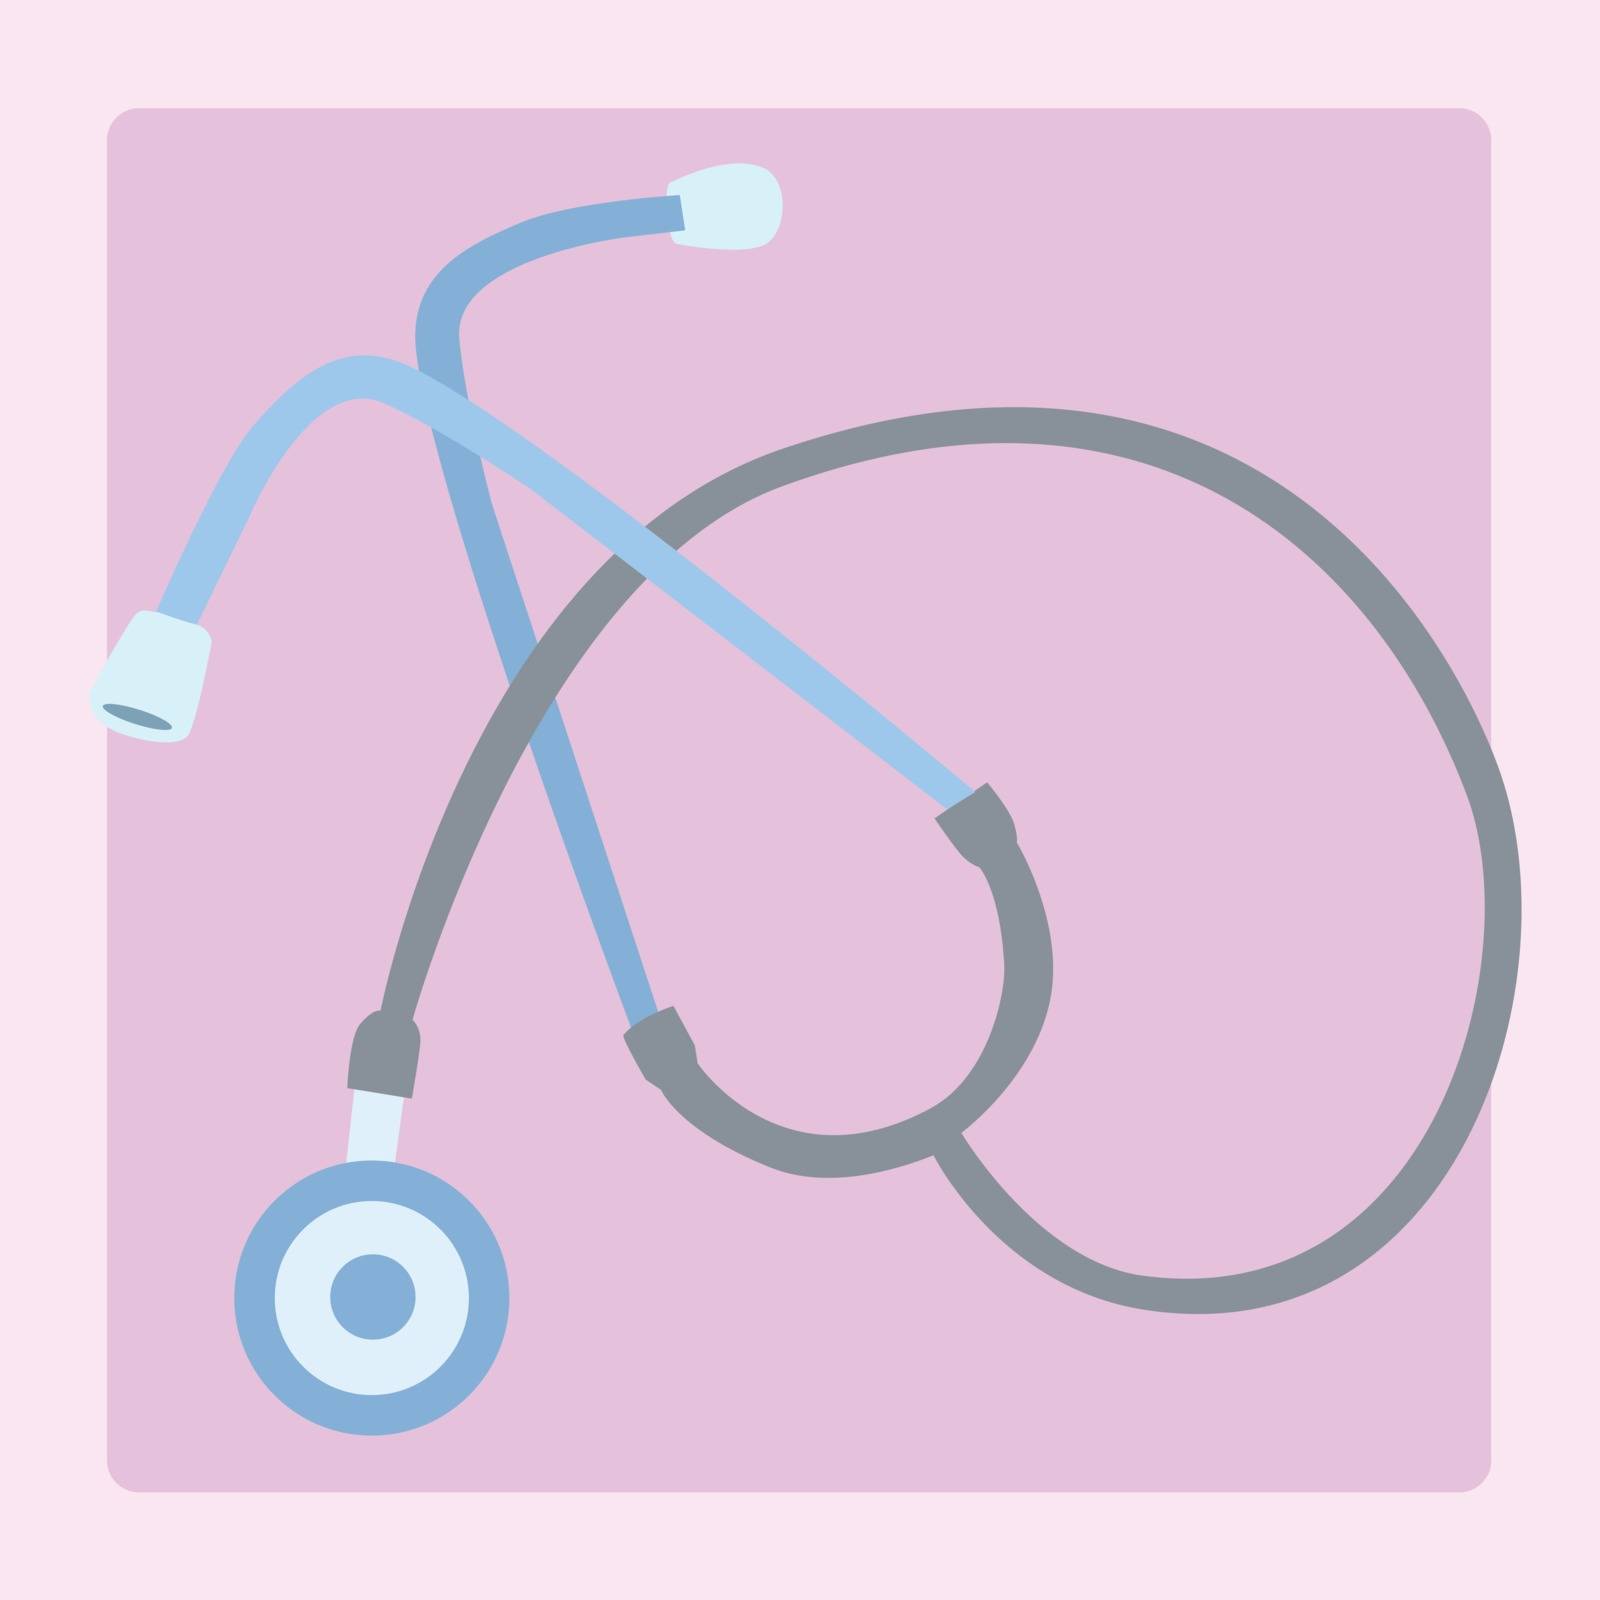 Medical device stethoscope on a neutral background icon symbol